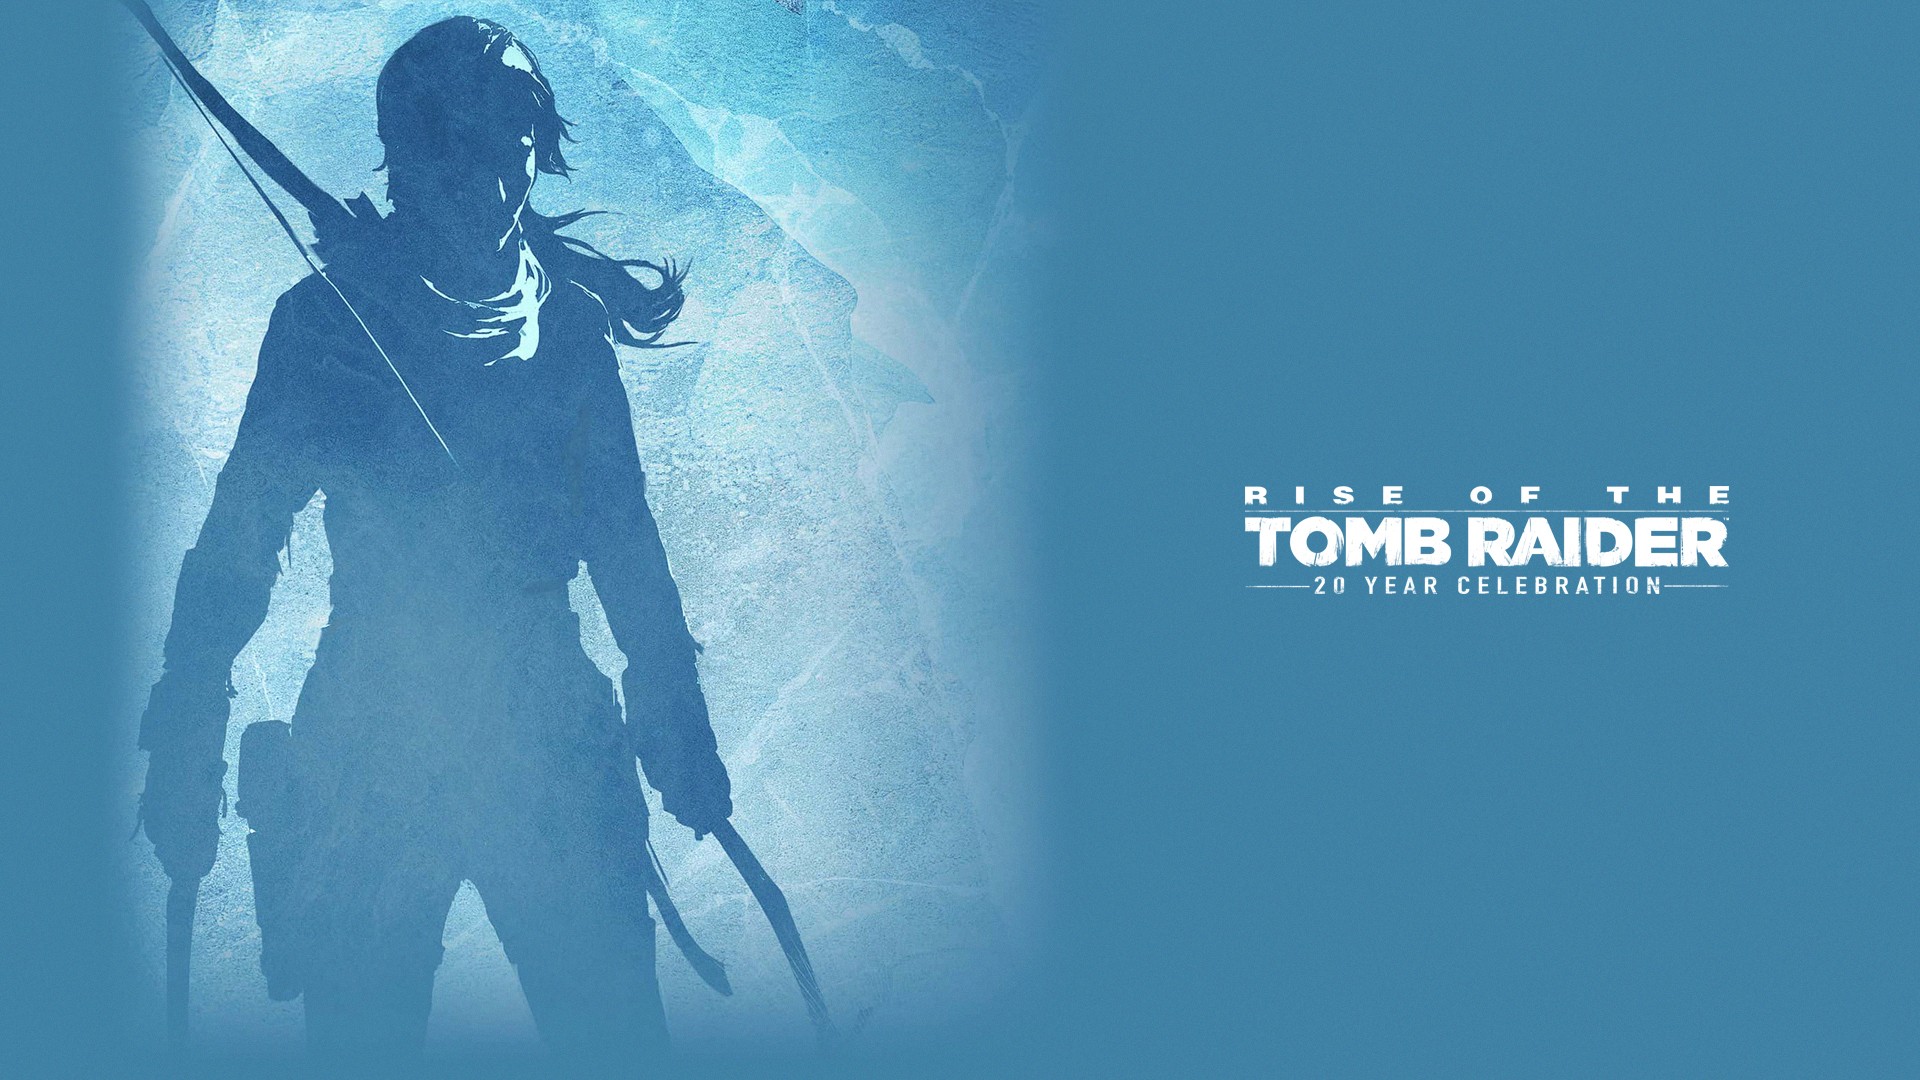 General 1920x1080 Rise of the Tomb Raider Tomb Raider blue background video games Lara Croft (Tomb Raider) video game girls video game characters PC gaming